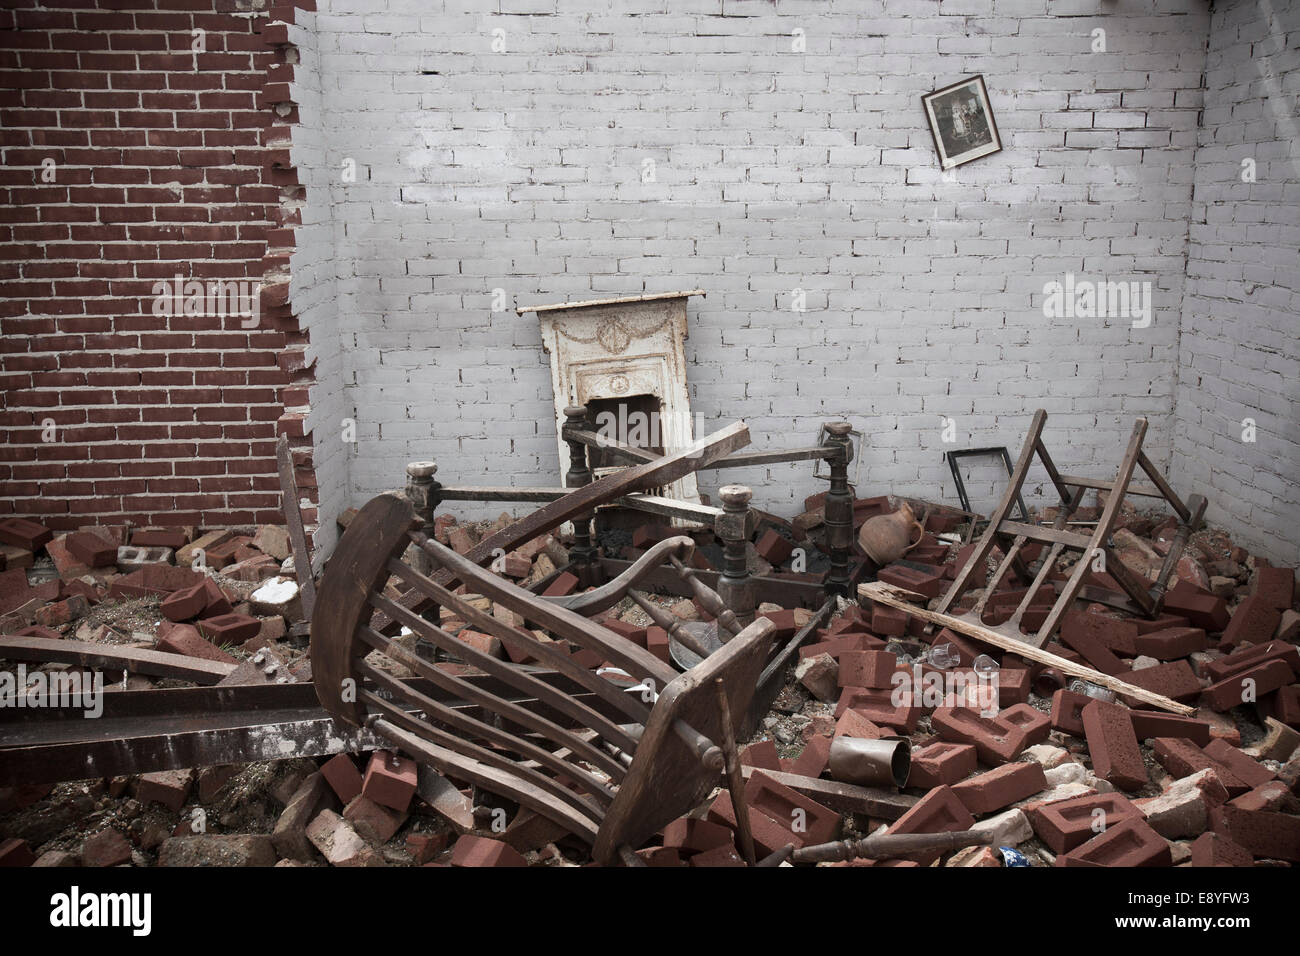 Recreation of the interior of a bombed destroyed building. Stock Photo